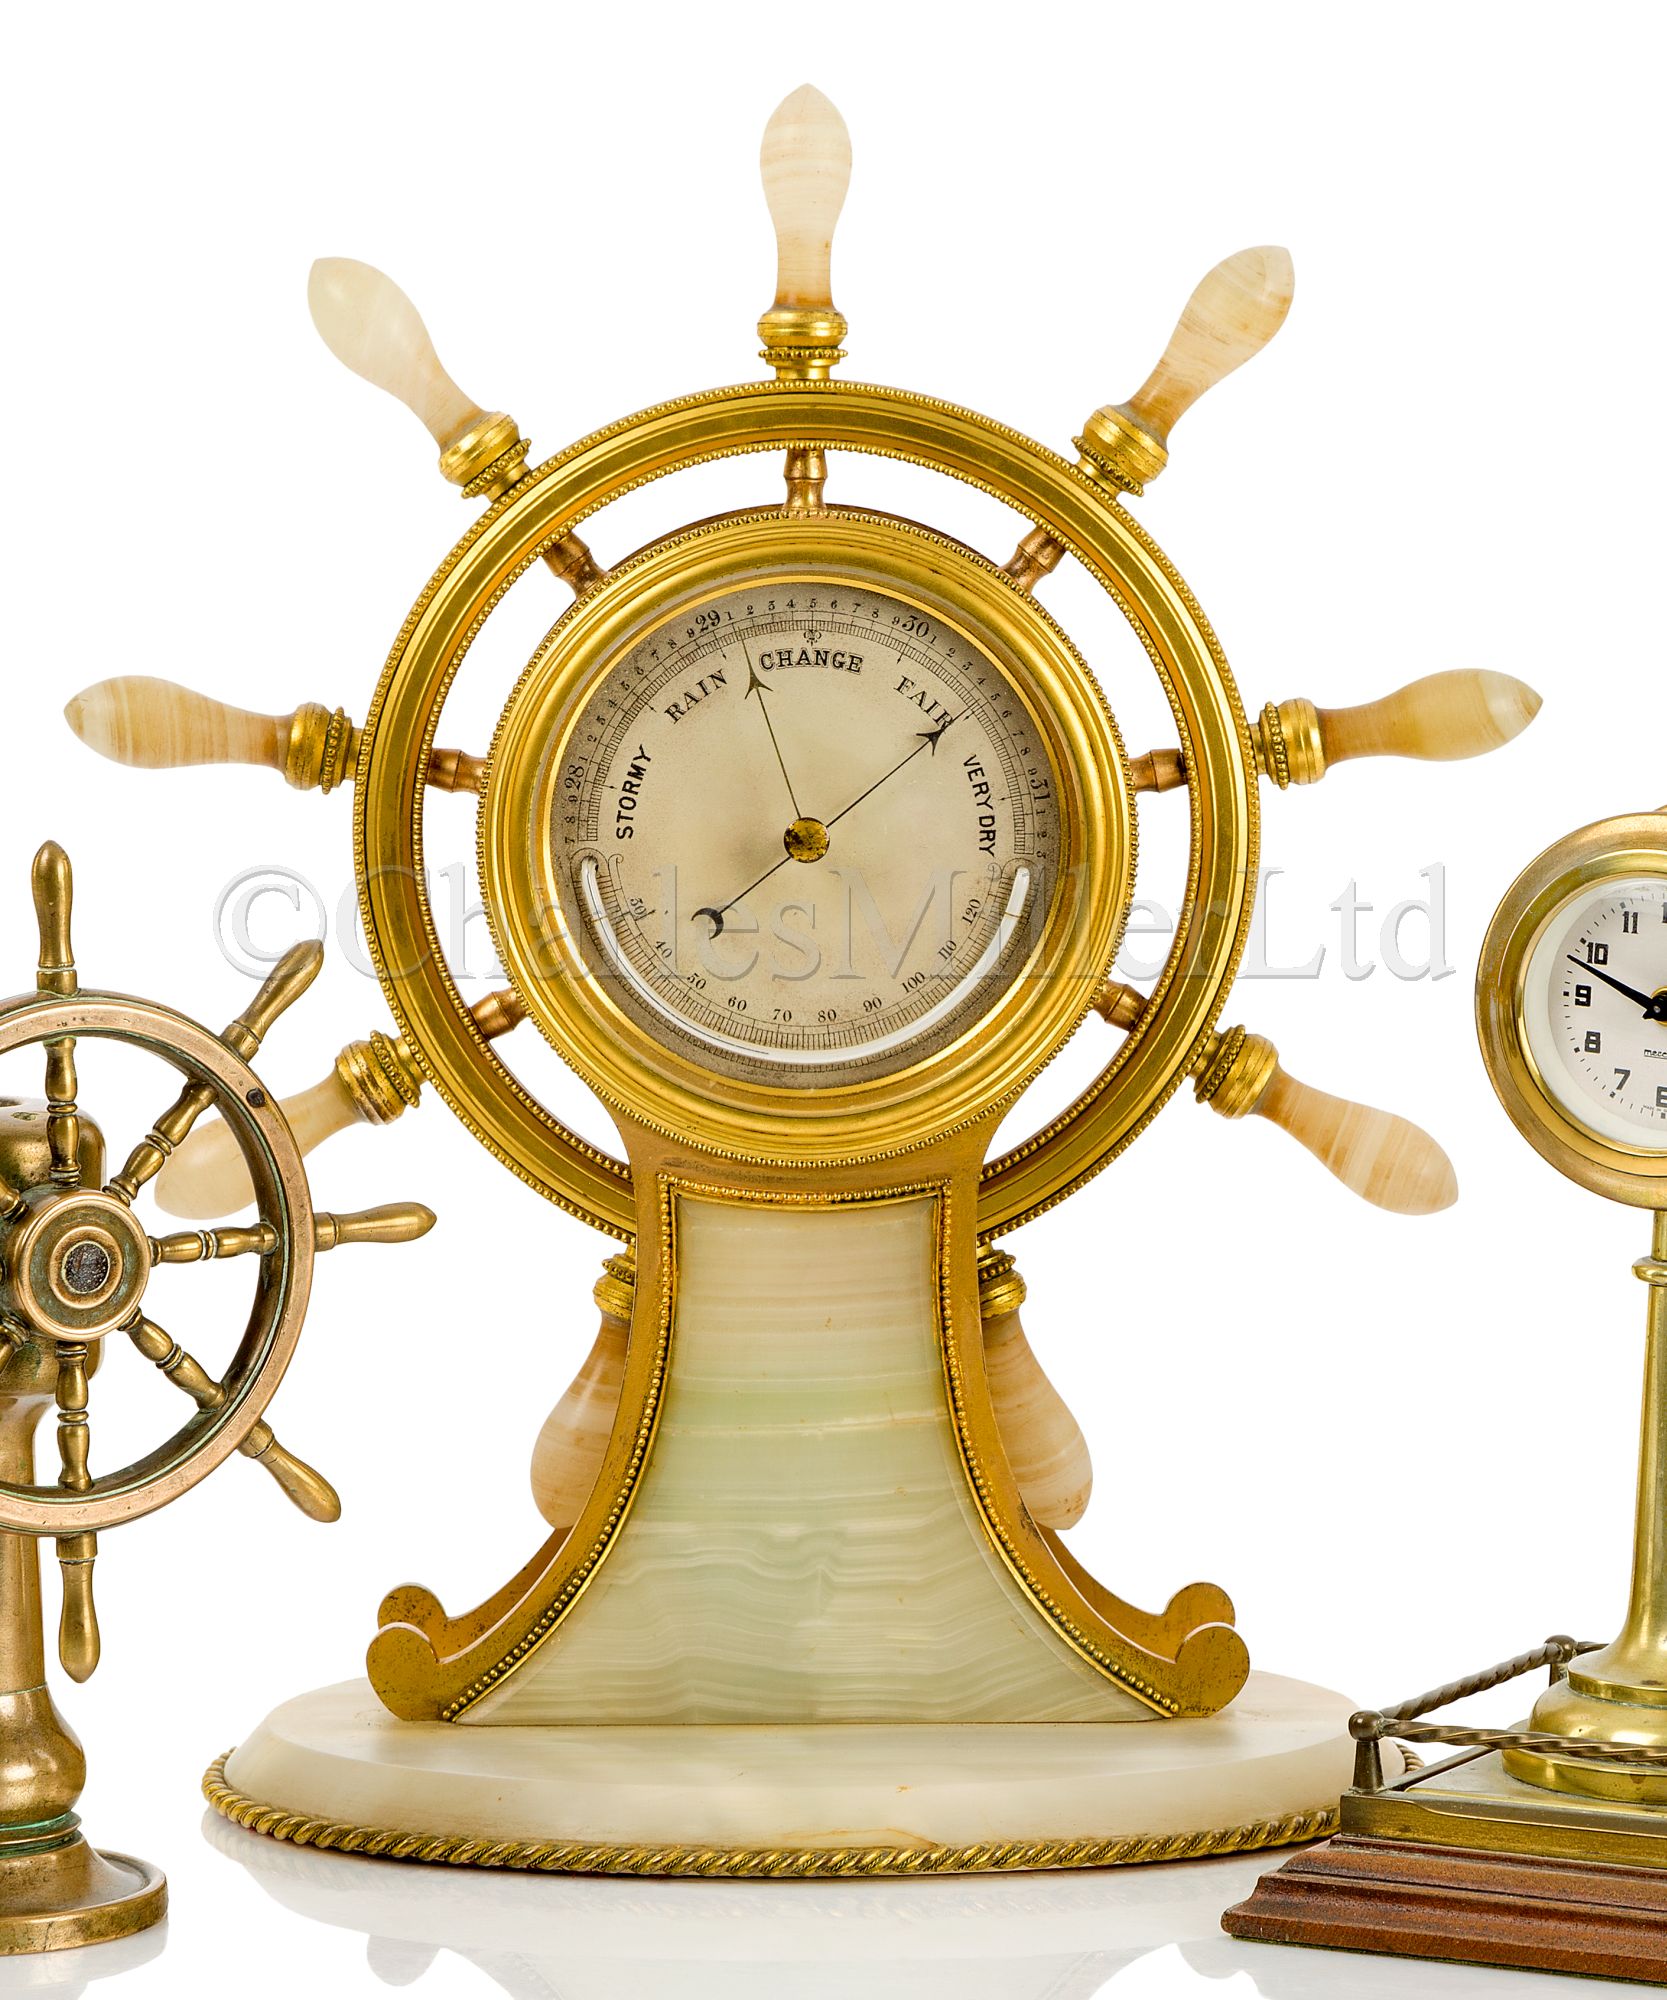 A FINE AND LARGE GILT, BRASS AND AGATE SHIP’S WHEEL DESK BAROMETER, ATTRIBUTED TO BETJEMANN & SONS